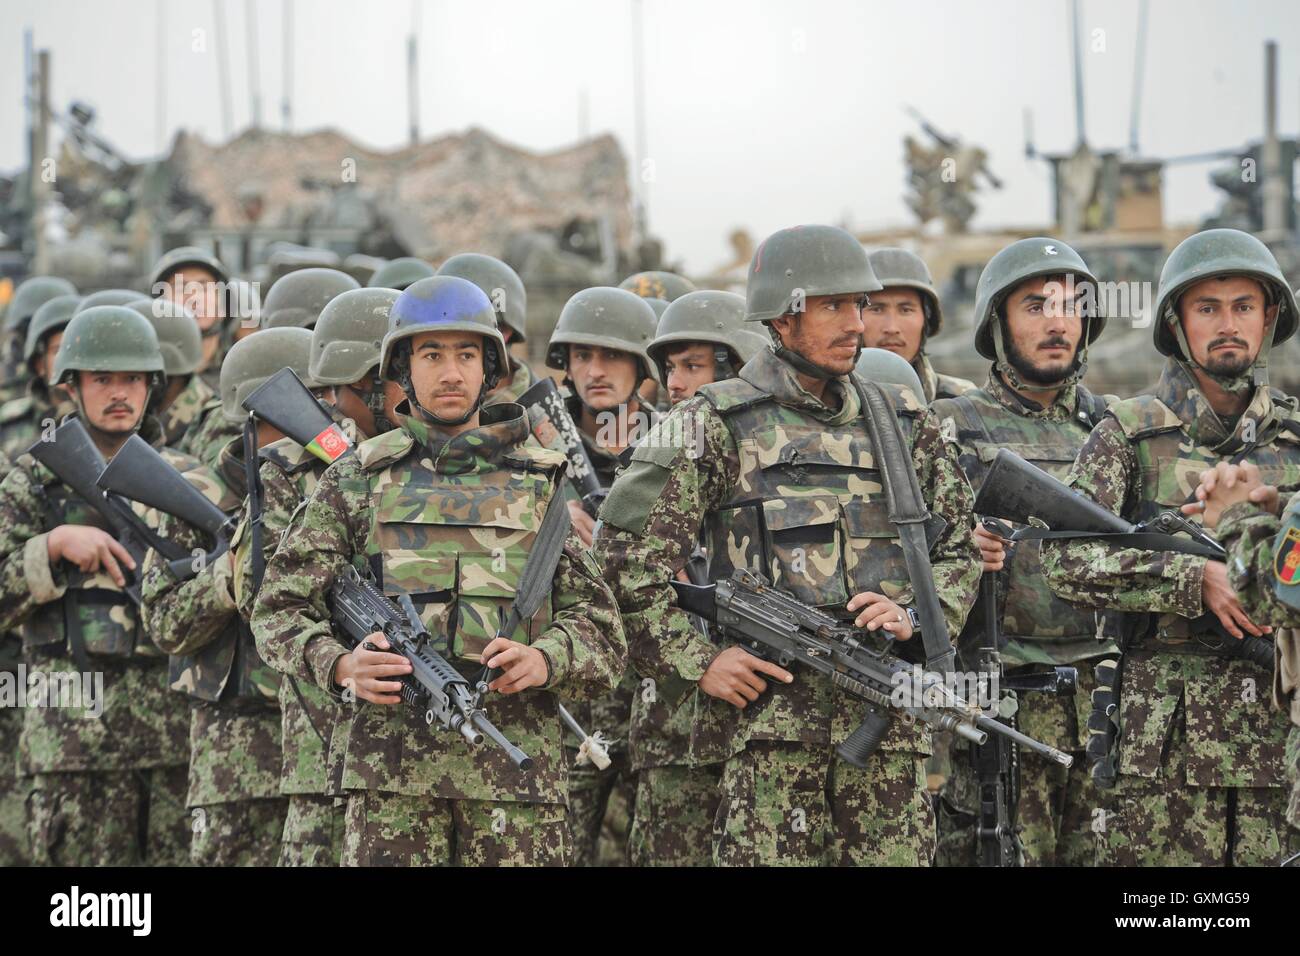 Afghan National Army soldiers stand in formation awaiting inspection at Camp Tombstone February 6, 2010 in Helmand province, Afghanistan. Stock Photo